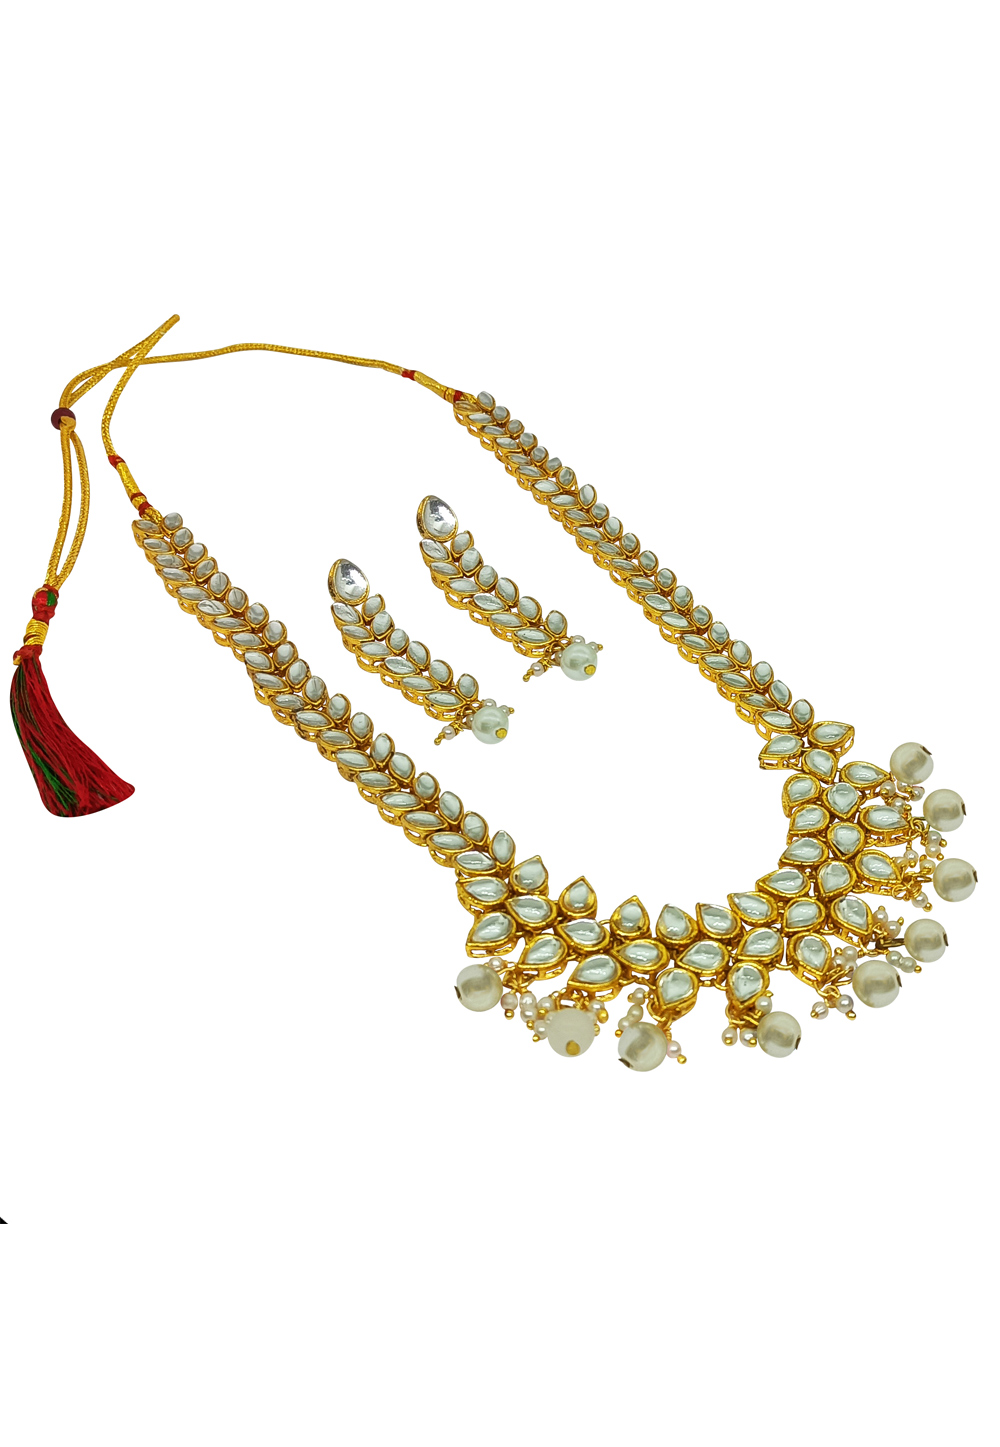 Off White Alloy Austrian Diamonds And Kundan Necklace Set With Earrings 269265